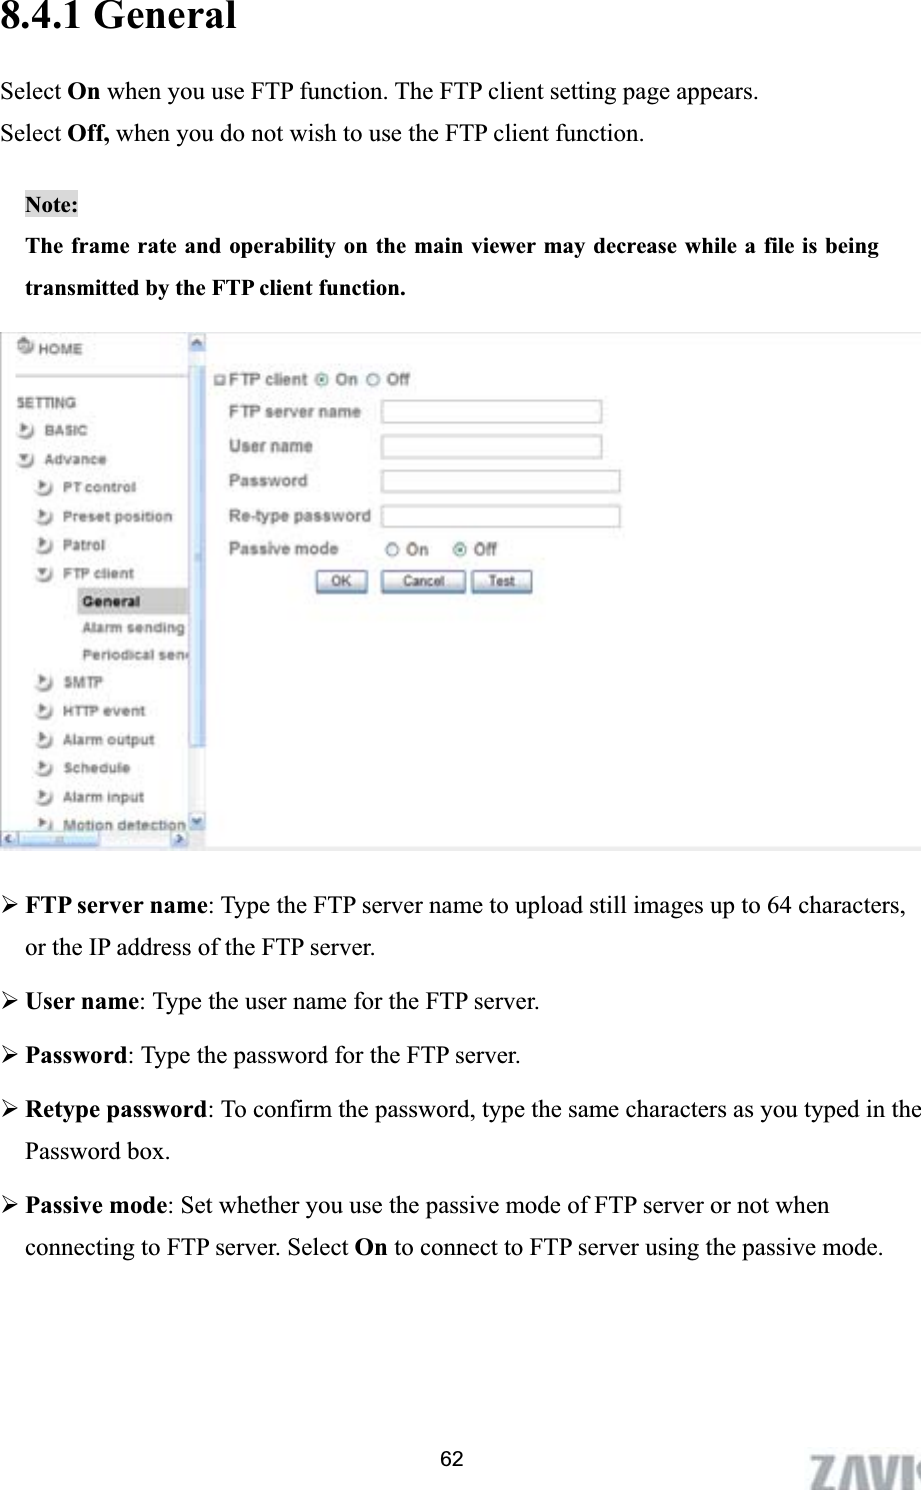      8.4.1 General Select On when you use FTP function. The FTP client setting page appears.   Select Off, when you do not wish to use the FTP client function.  Note:The frame rate and operability on the main viewer may decrease while a file is being transmitted by the FTP client function.   ¾FTP server name: Type the FTP server name to upload still images up to 64 characters, or the IP address of the FTP server. ¾User name: Type the user name for the FTP server. ¾Password: Type the password for the FTP server. ¾Retype password: To confirm the password, type the same characters as you typed in the Password box. ¾Passive mode: Set whether you use the passive mode of FTP server or not when connecting to FTP server. Select On to connect to FTP server using the passive mode. 62